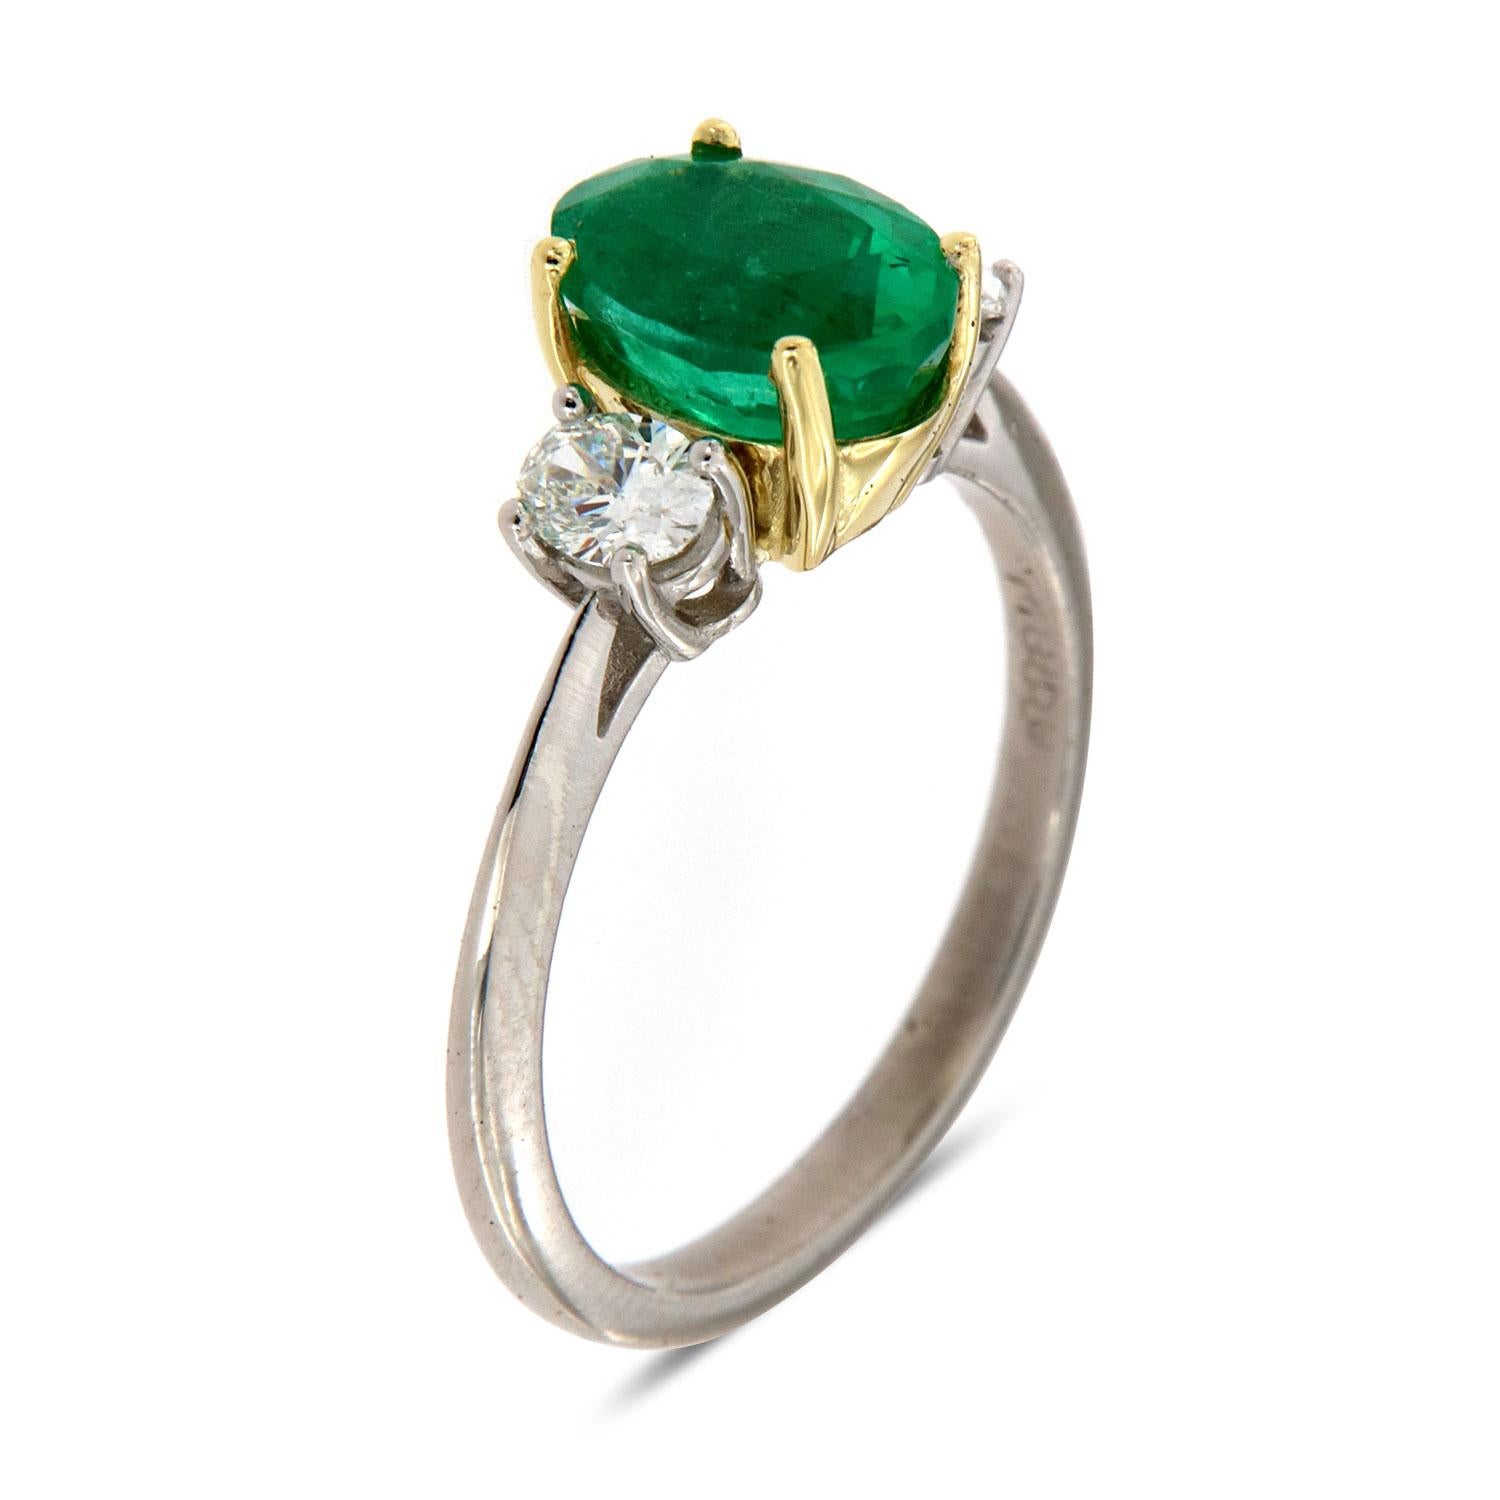 This Classic Three-stone ring features a 1.86 Carat Ethiopian Oval-shaped emerald flanked by two perfectly matched Oval-shaped natural diamonds in the total weight of 0.37 carat. Our clients love Ethiopian emerald due to their exceptional luster and